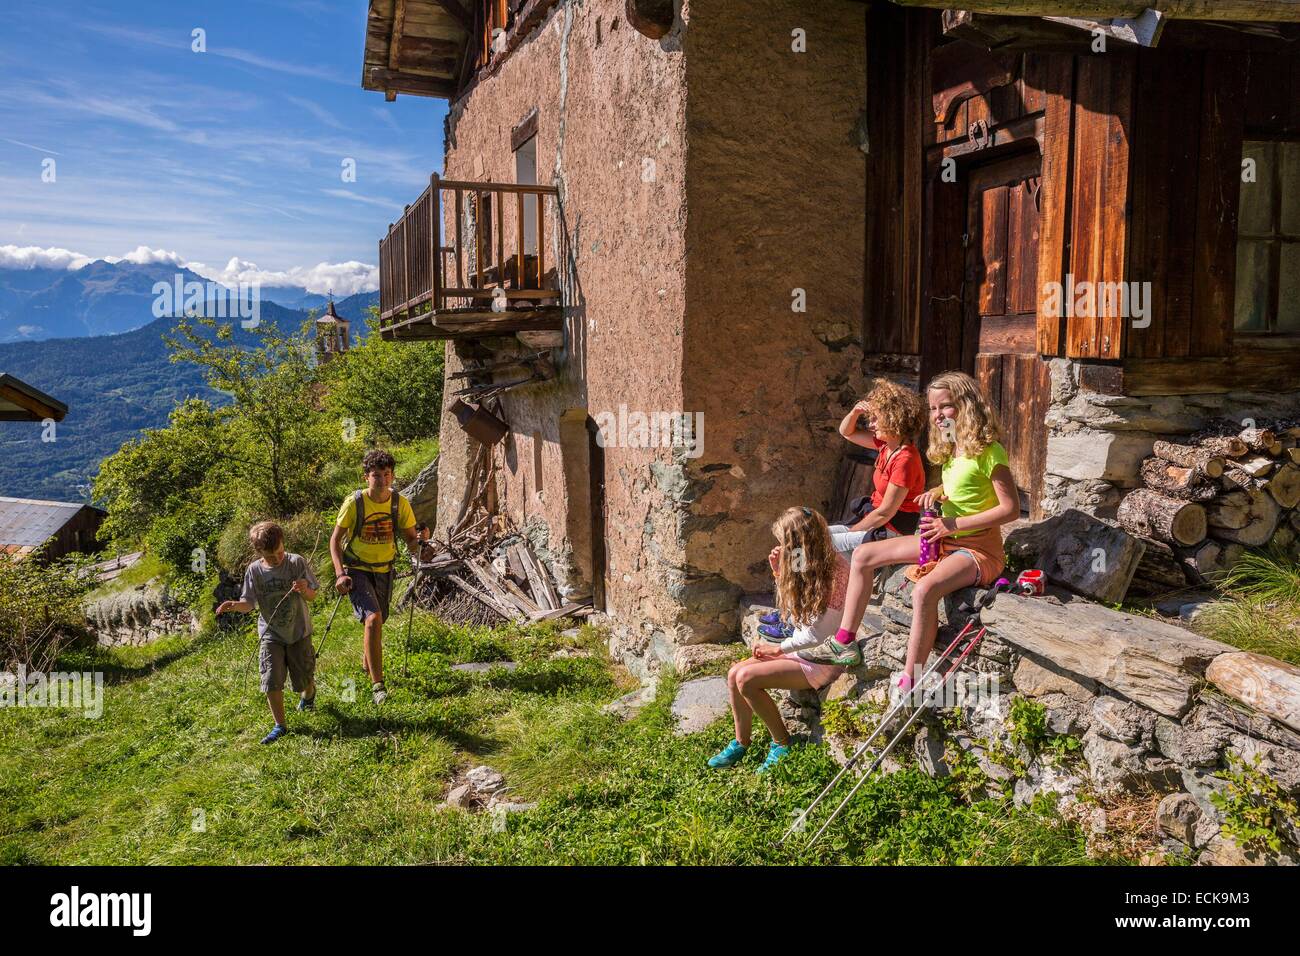 France, Savoie, Notre-Dame-du-PrΘ, traditional house of the hamlet of Hauteville, Tarentaise valley Stock Photo